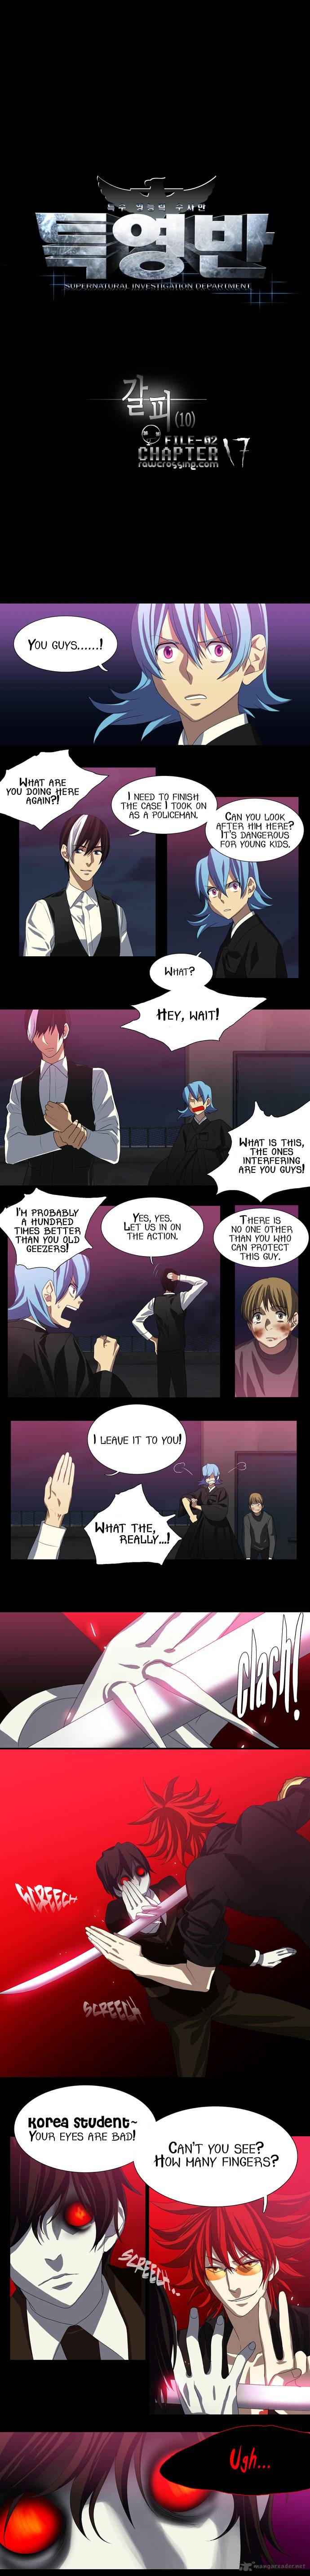 S I D Chapter 17 Page 2